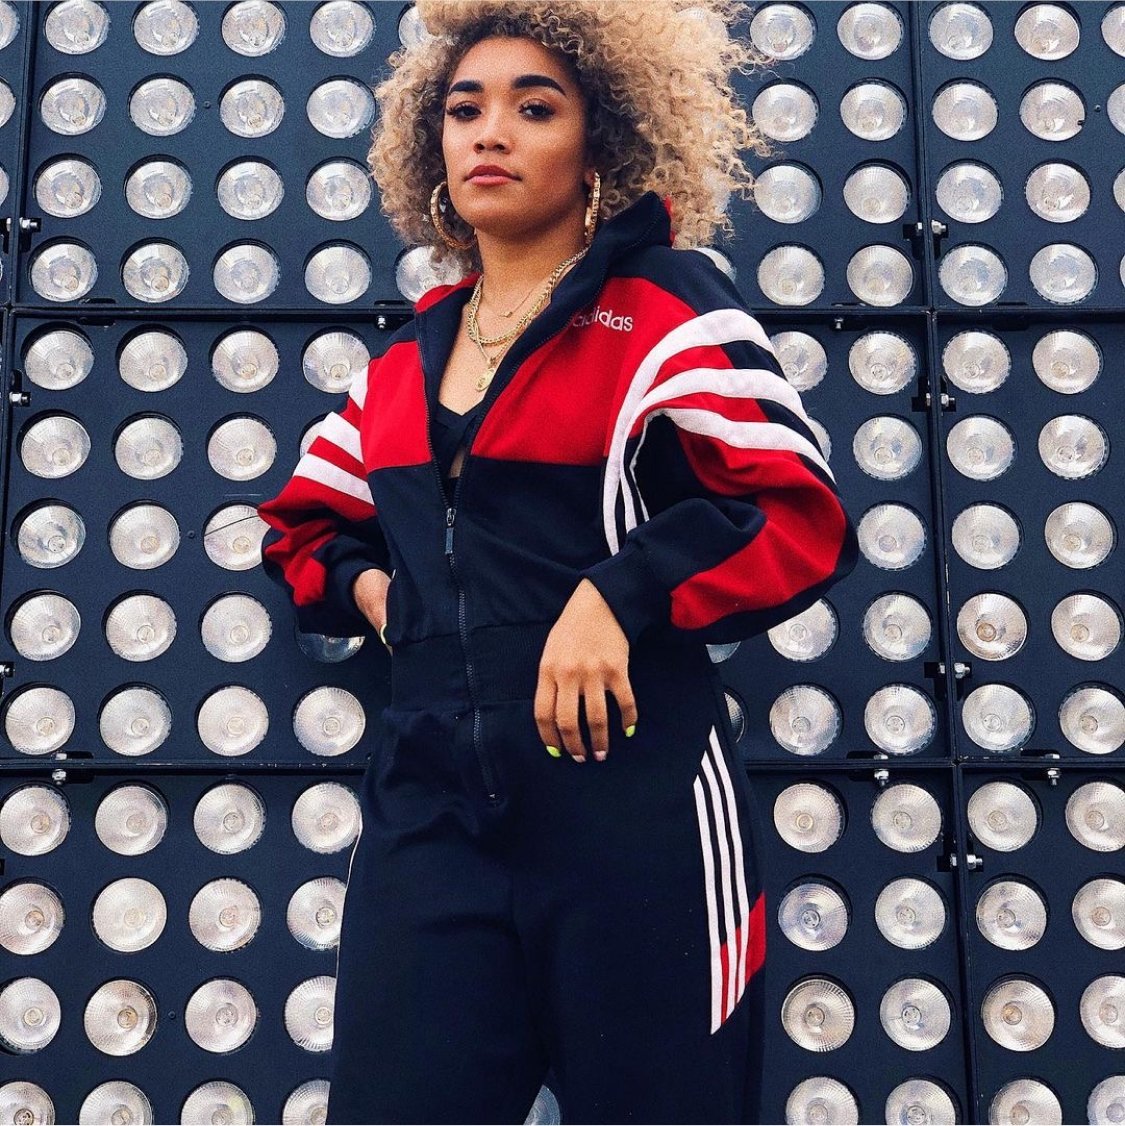 Let's #sharejoy with @ItsEricaCody . 

Pop star and #IrishWomenInHarmony Erica Cody has given us this fierce adidas jumpsuit which she looks fierce in. 

Find out more on our IG is.gd/jCqzAw

#turnbluemondaypurple💜